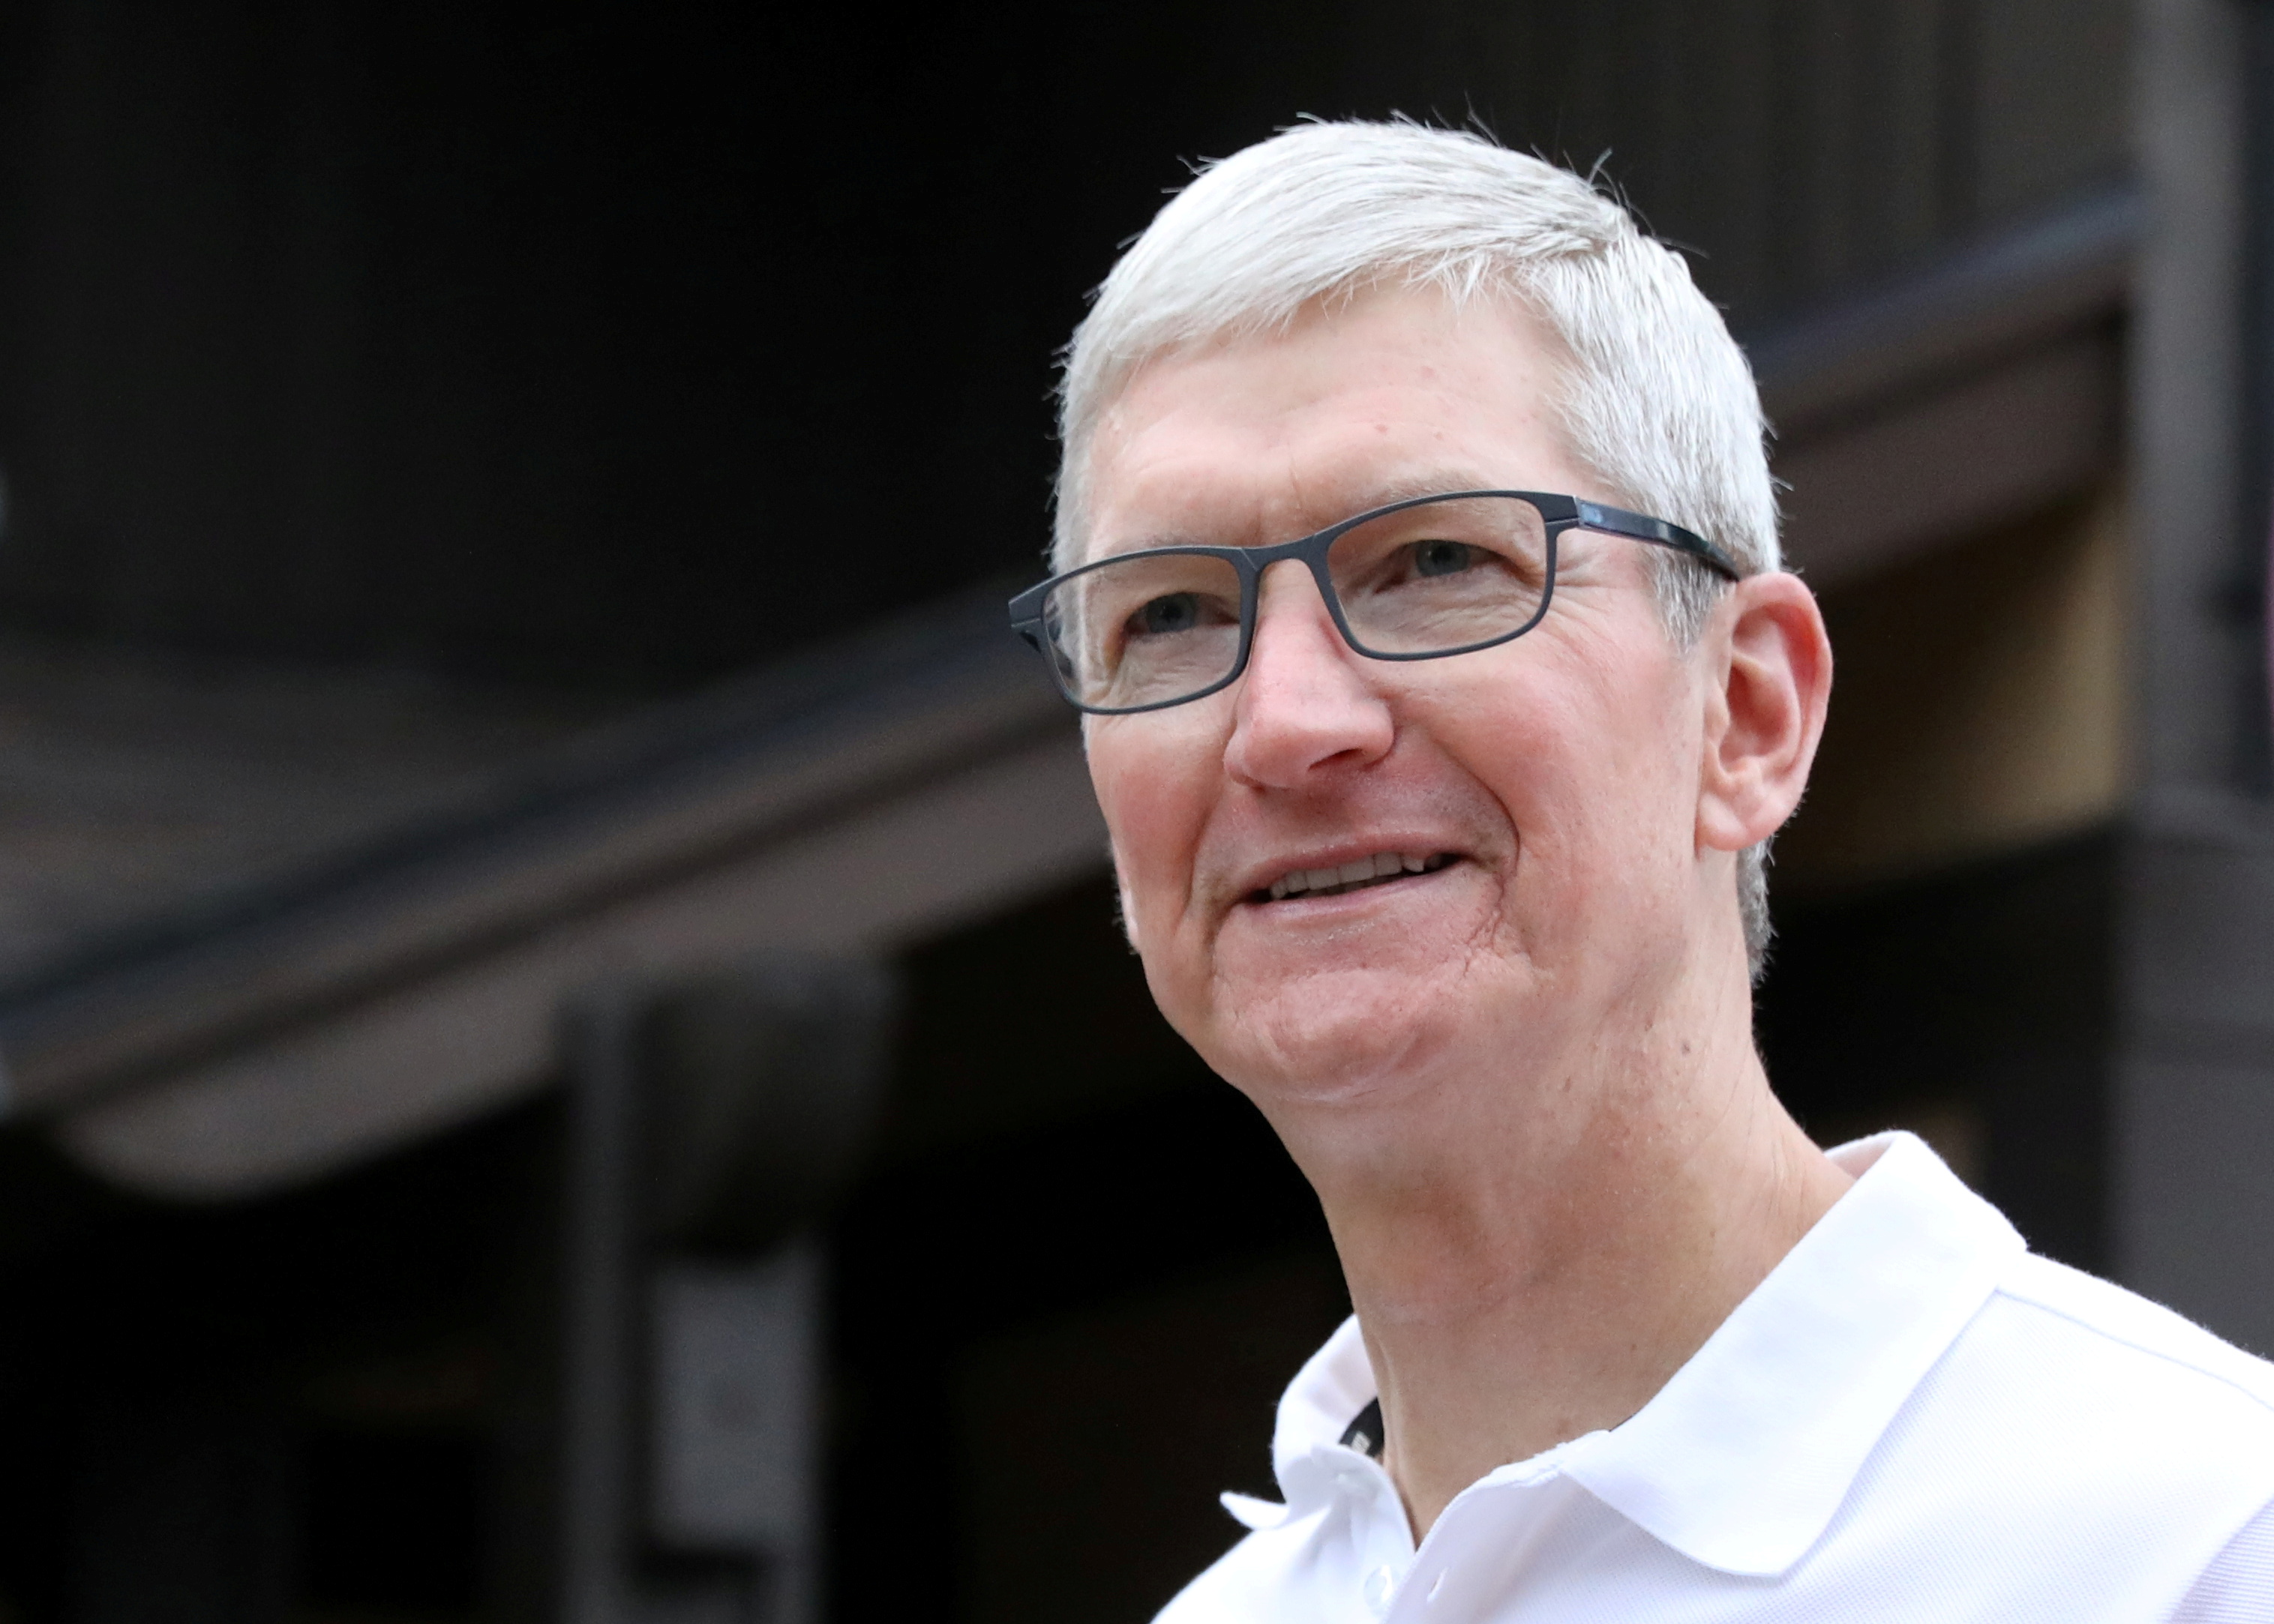 Tim Cook, CEO of Apple, attends the annual Allen and Co. Sun Valley media conference in Sun Valley, Idaho, U.S., July 10, 2019. REUTERS/Brendan McDermid/File Photo